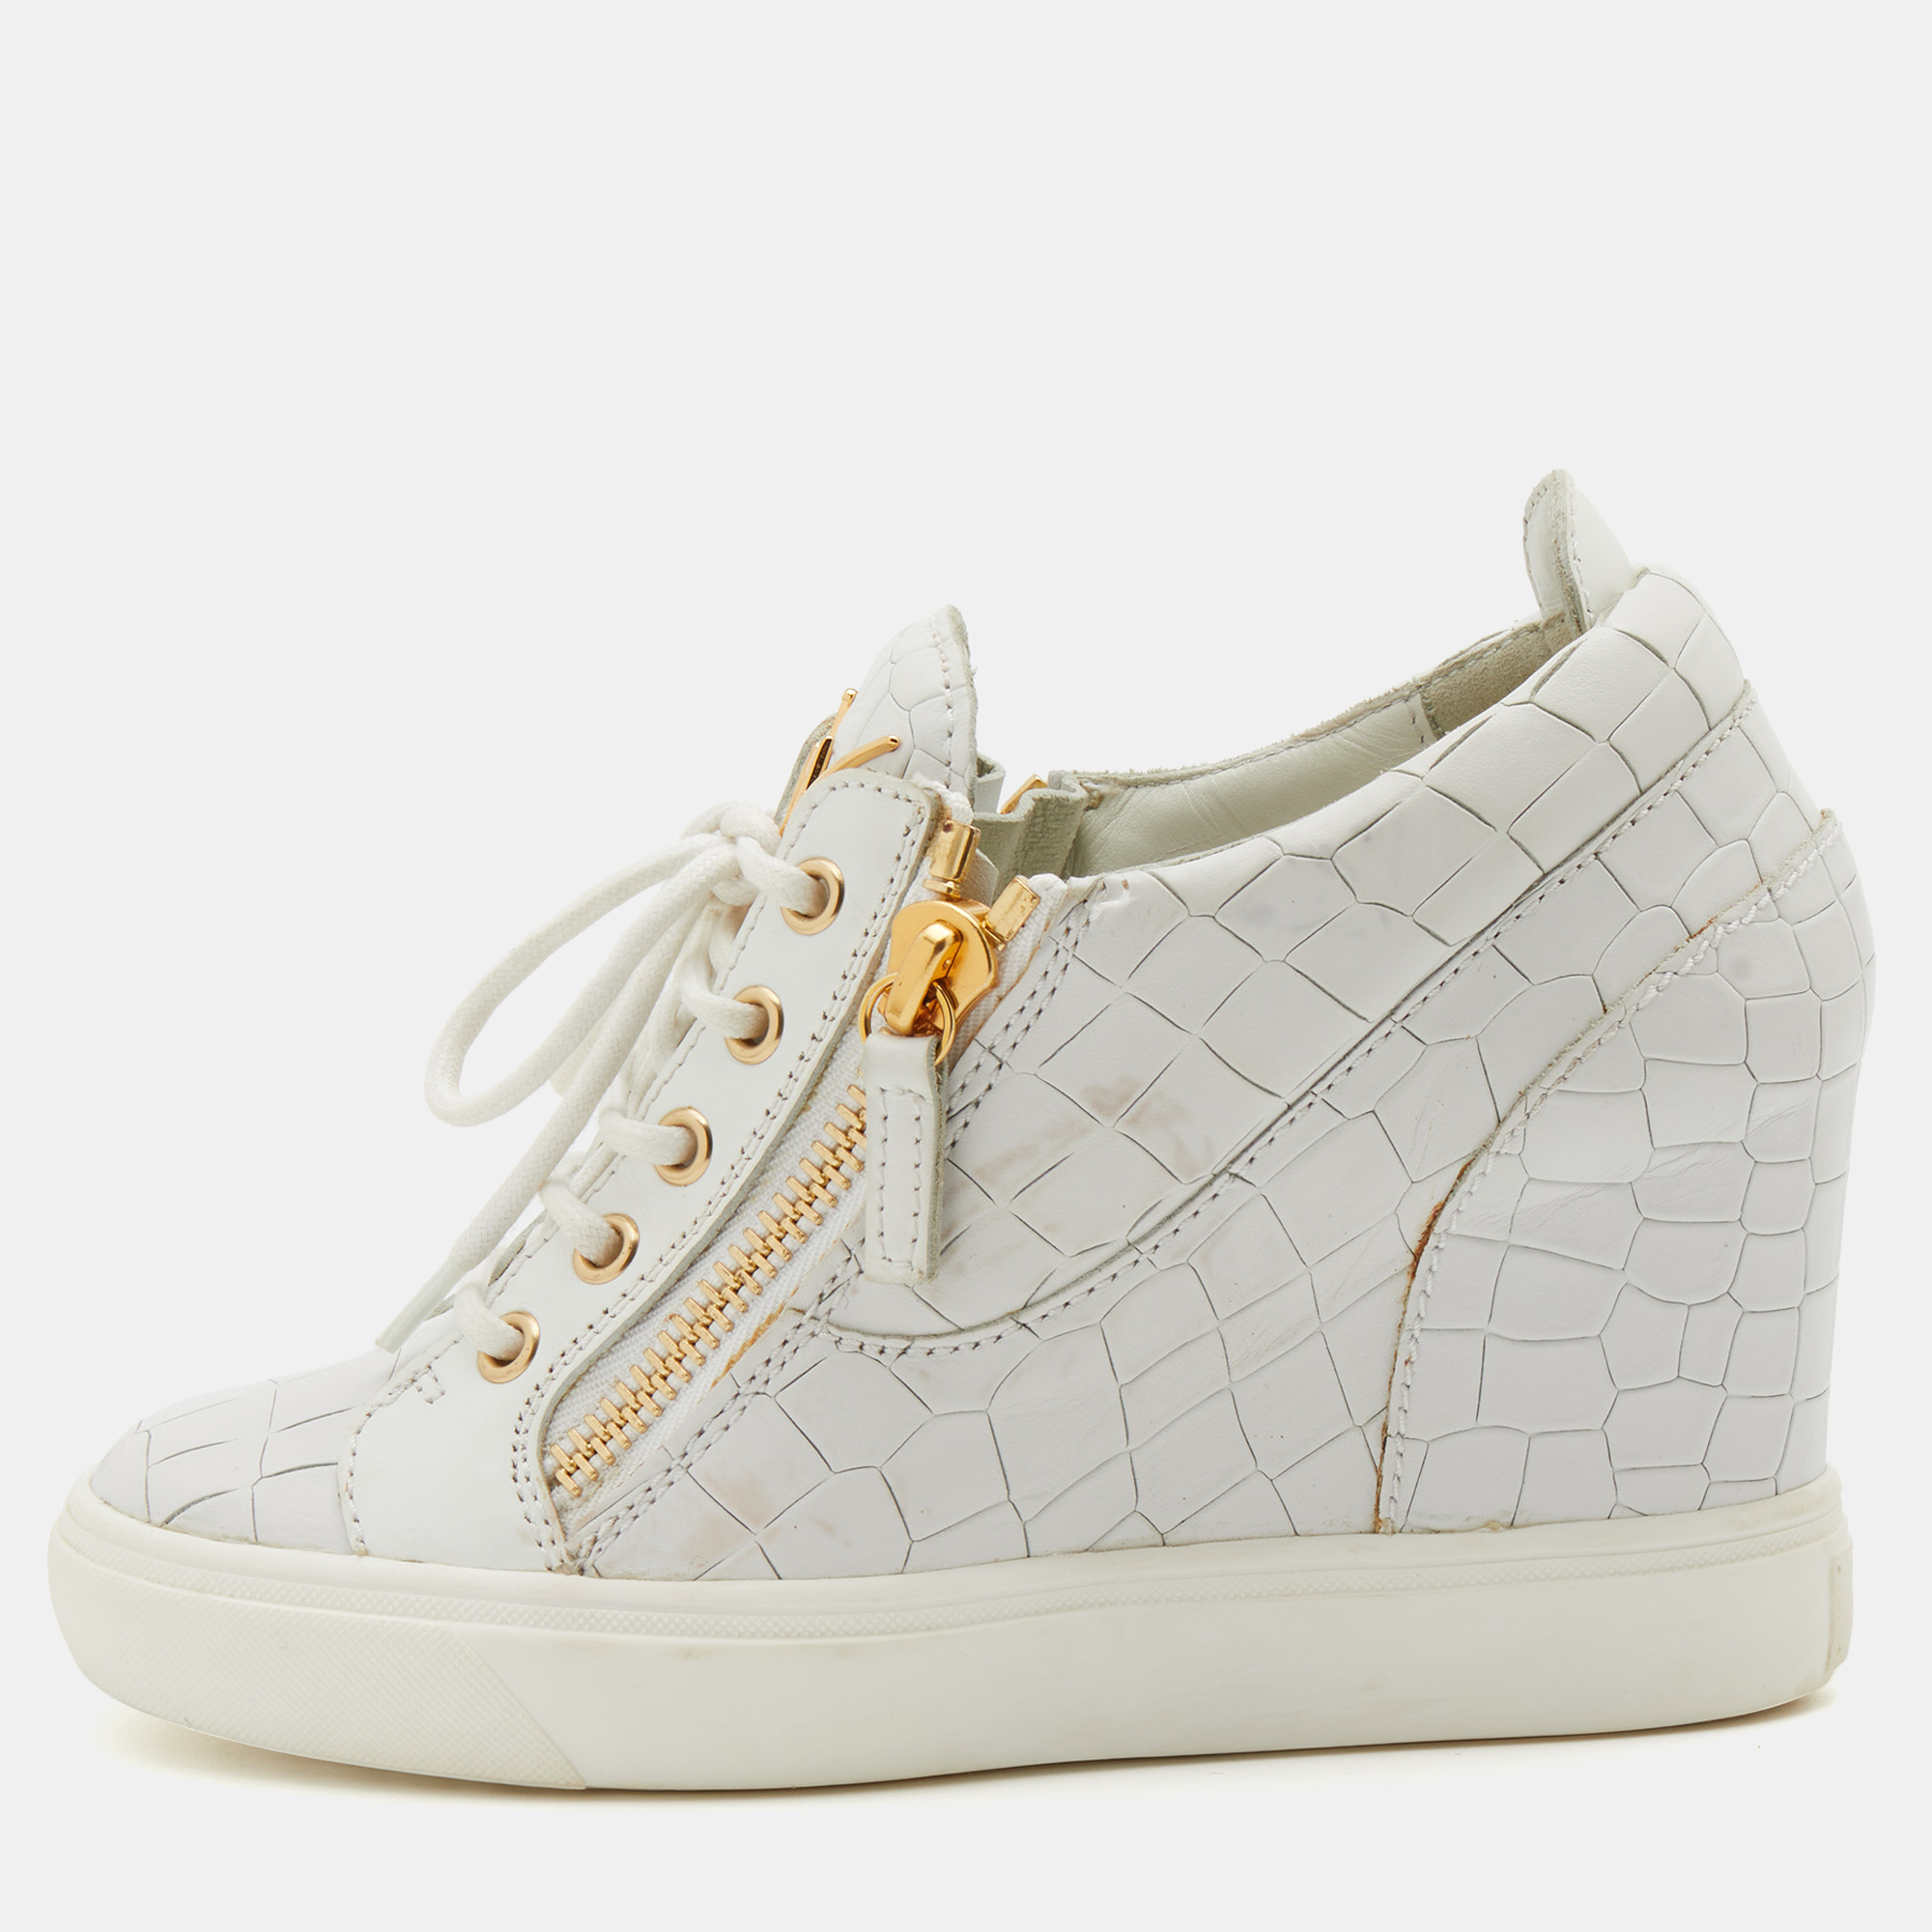 

Giuseppe Zanotti White Croc Embossed Leather Wedge Sneakers Size